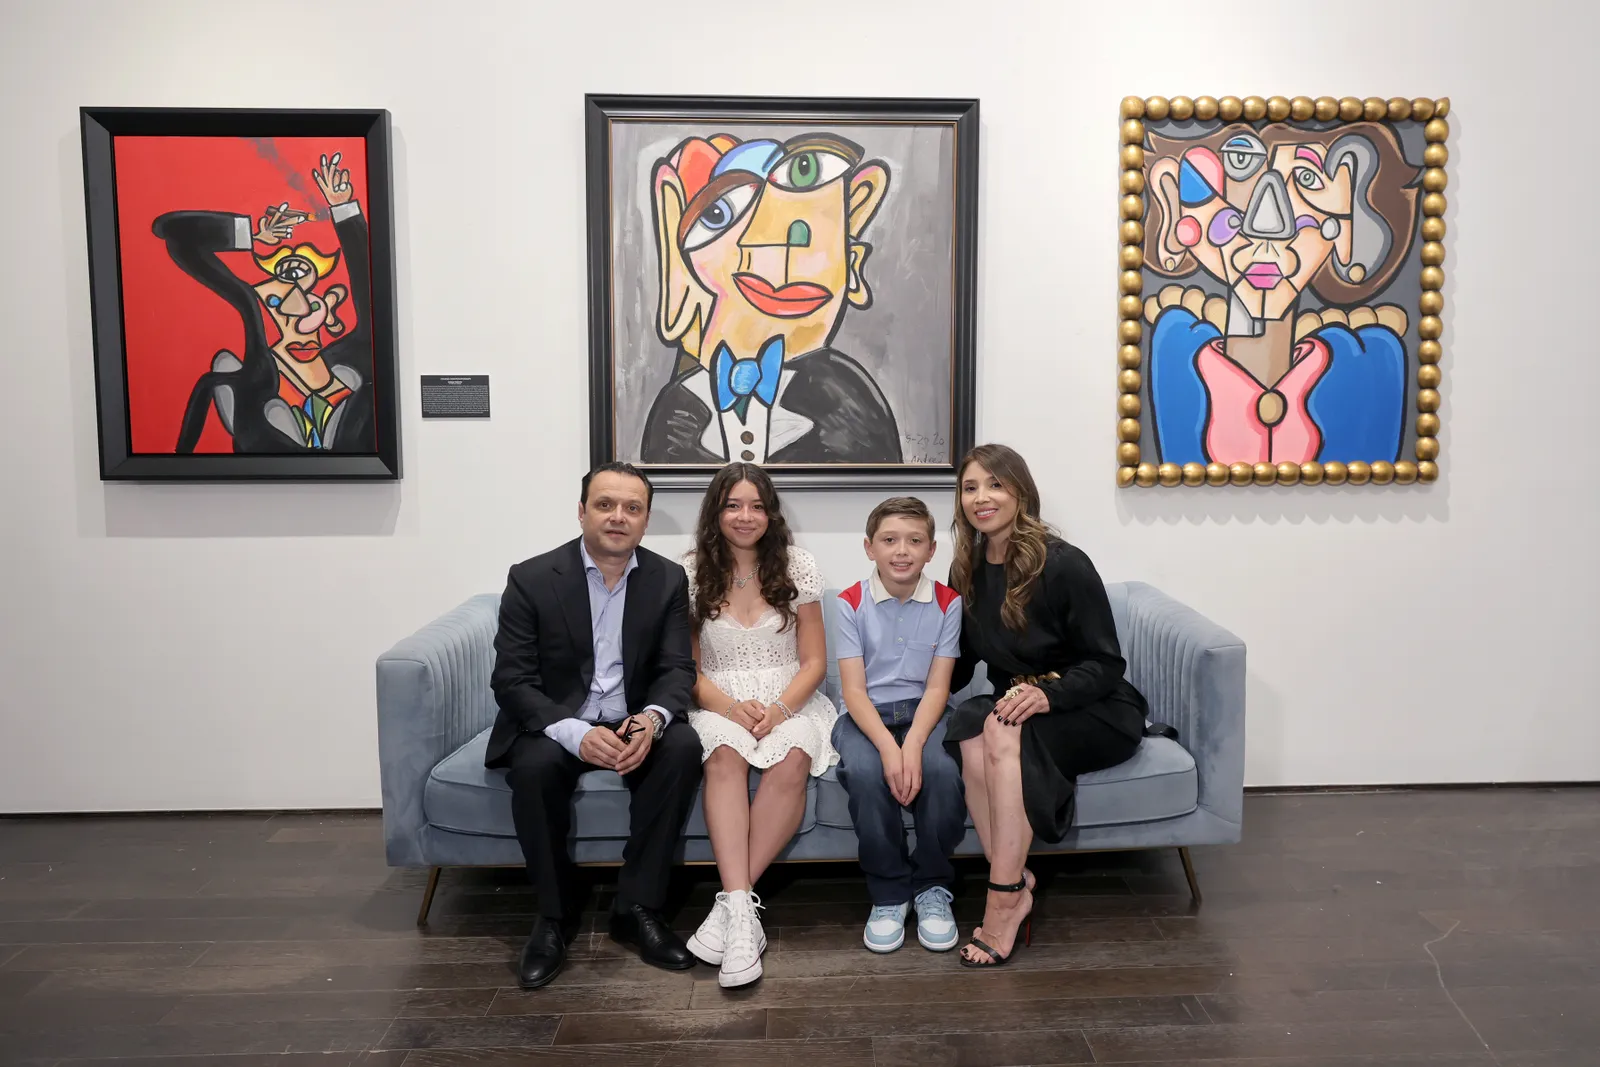 This 10-Year-Old Boy Makes Art That Sells for Over $100,000 | Smart News